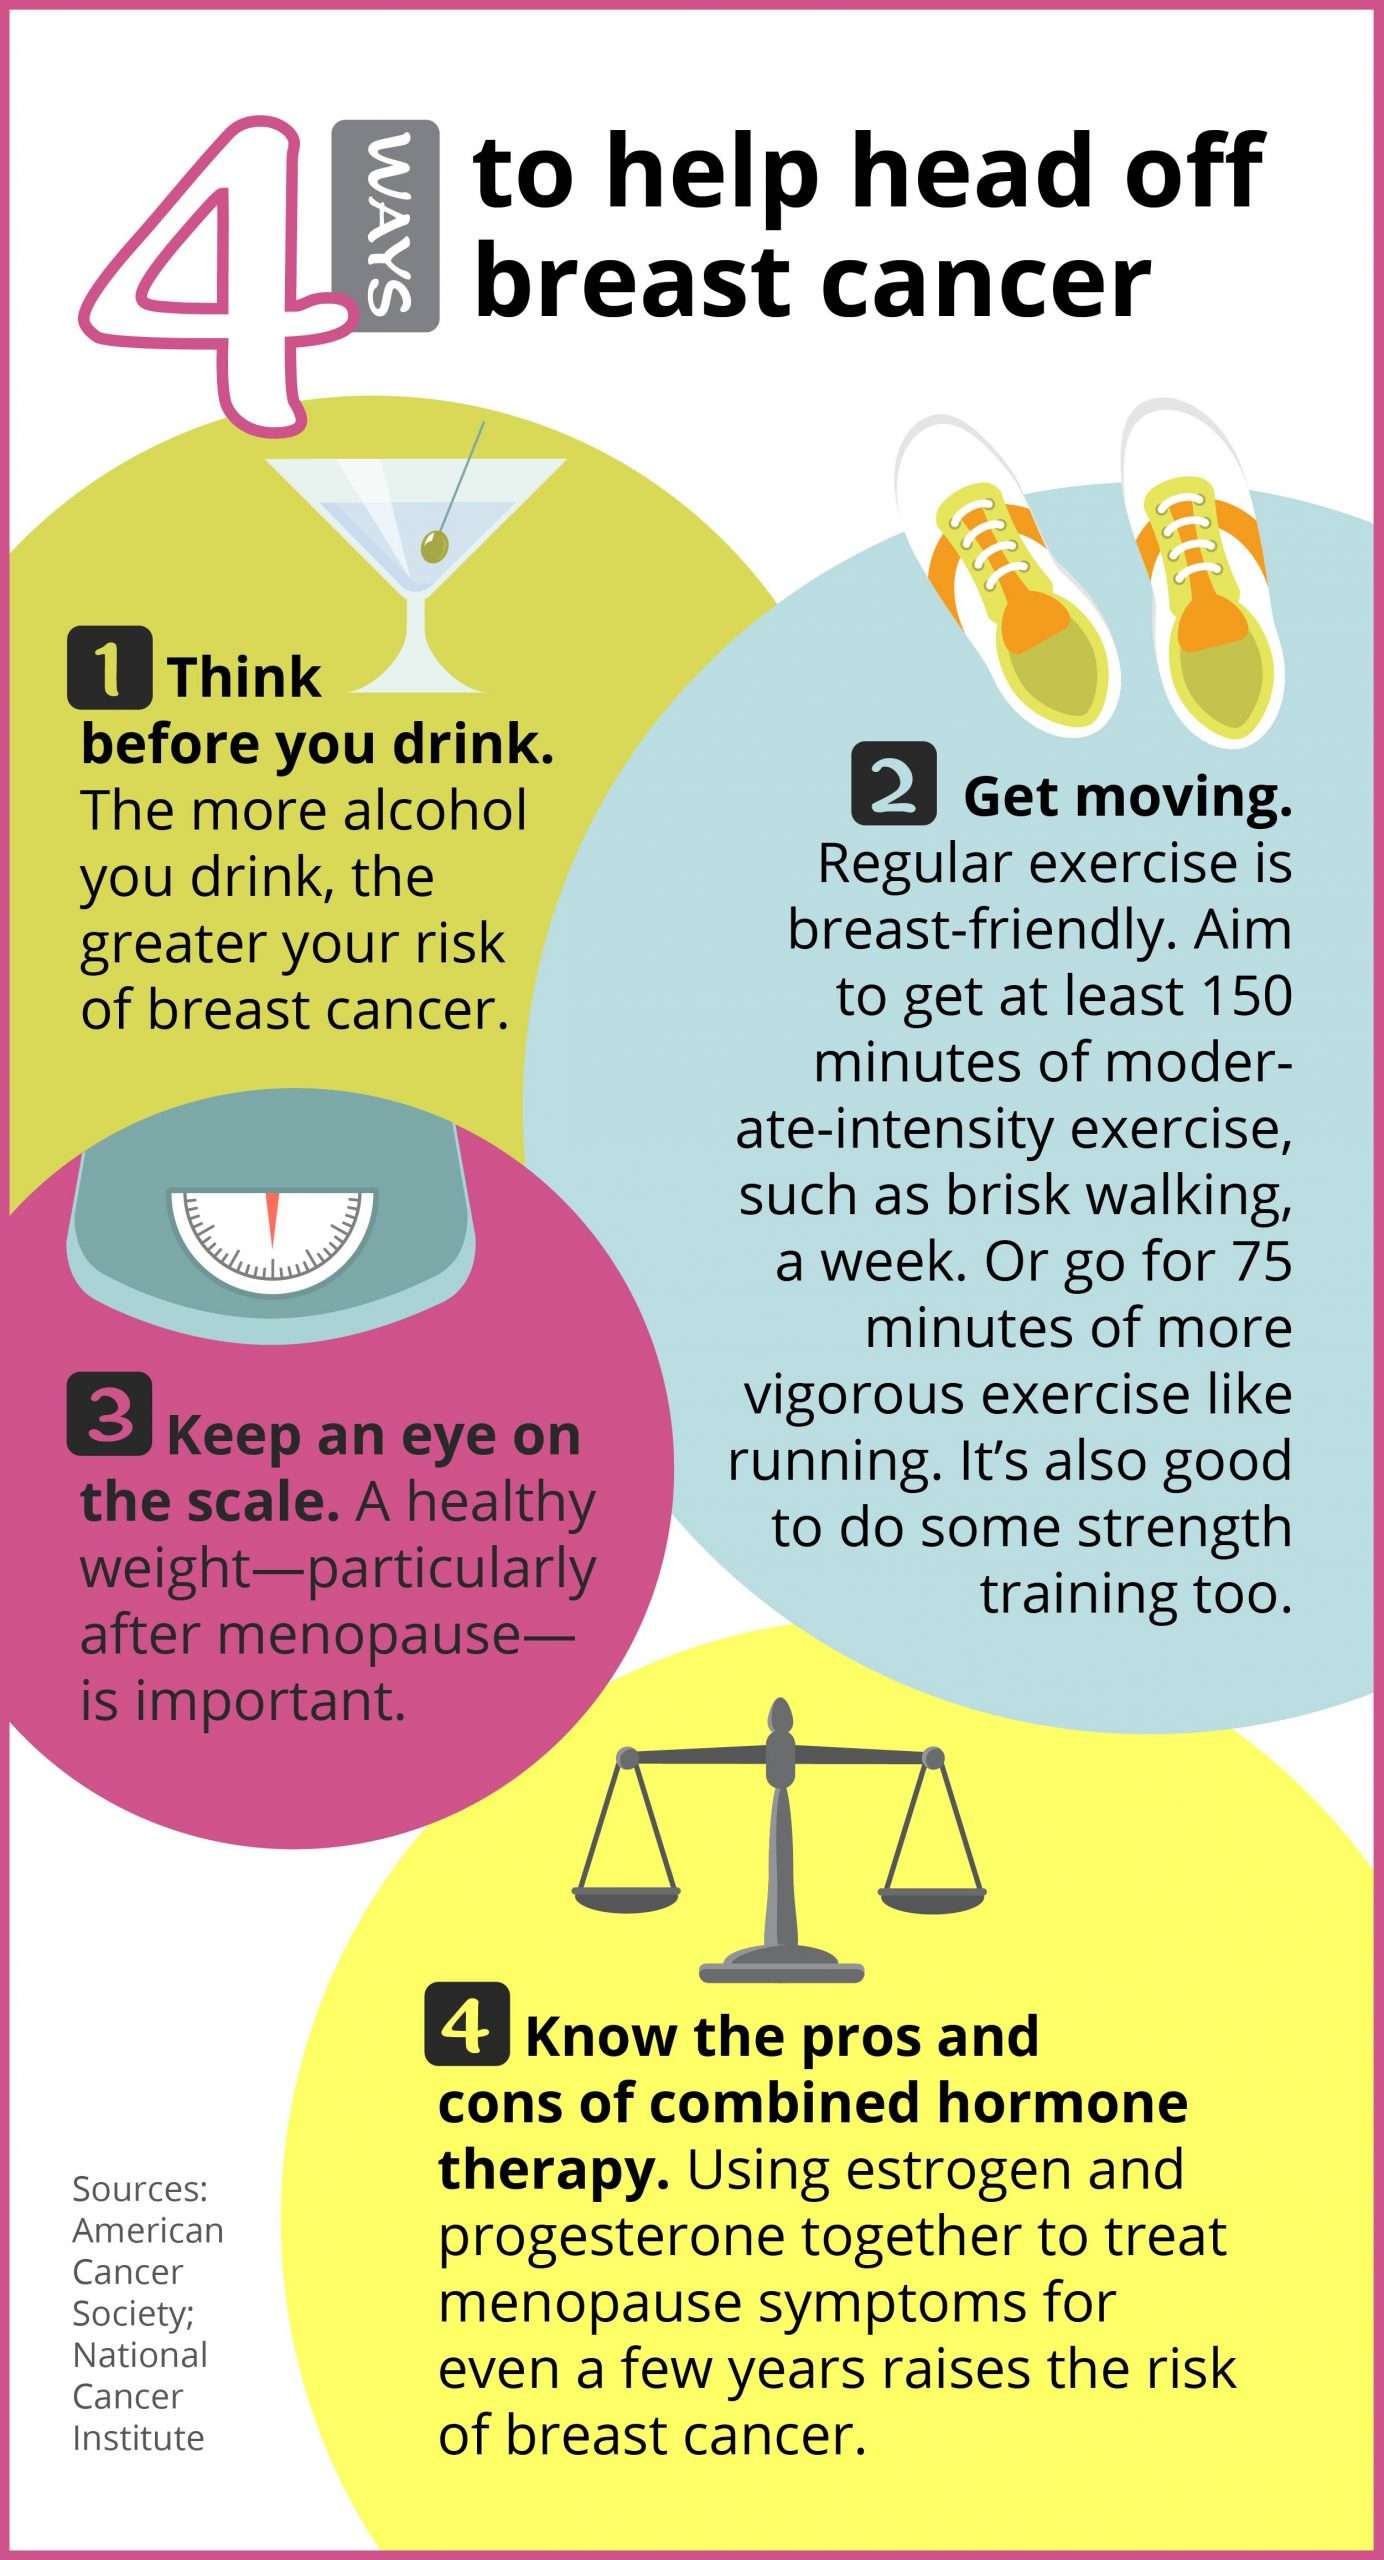 Learn how to lower your risk of breast cancer